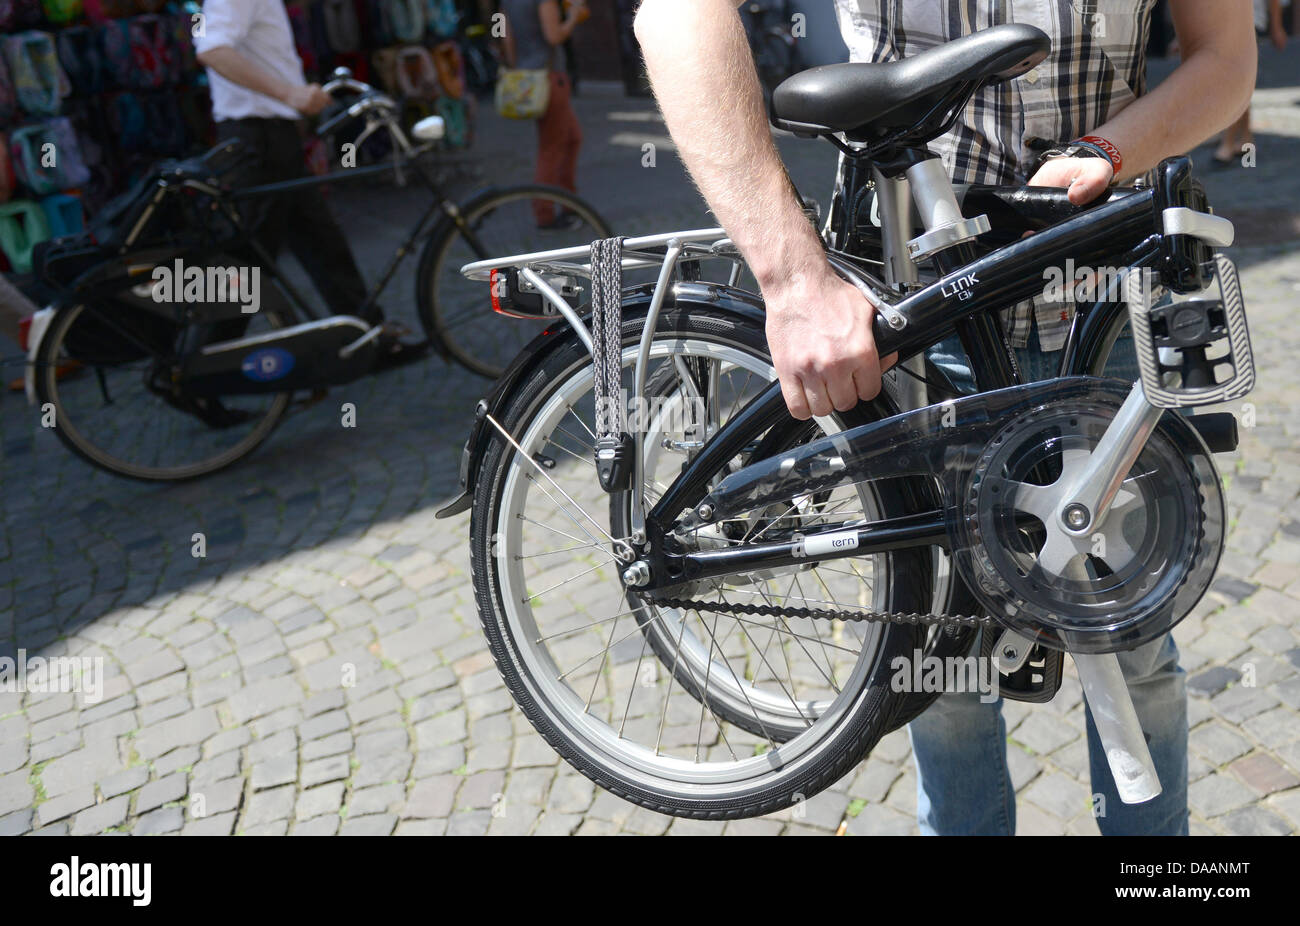 Employee Vincent Becker carries a foldable bicycle from the municipal works in Muenster, Germany, 09 July 2013. The Muenster municipal works are renting foldable bicycles to their customers to connect all forms of public transportation from door to door. The bicycle can be used to cycle from home to the bus stop and then folded and take on the bus. Photo: CAROLINE SEIDEL Stock Photo